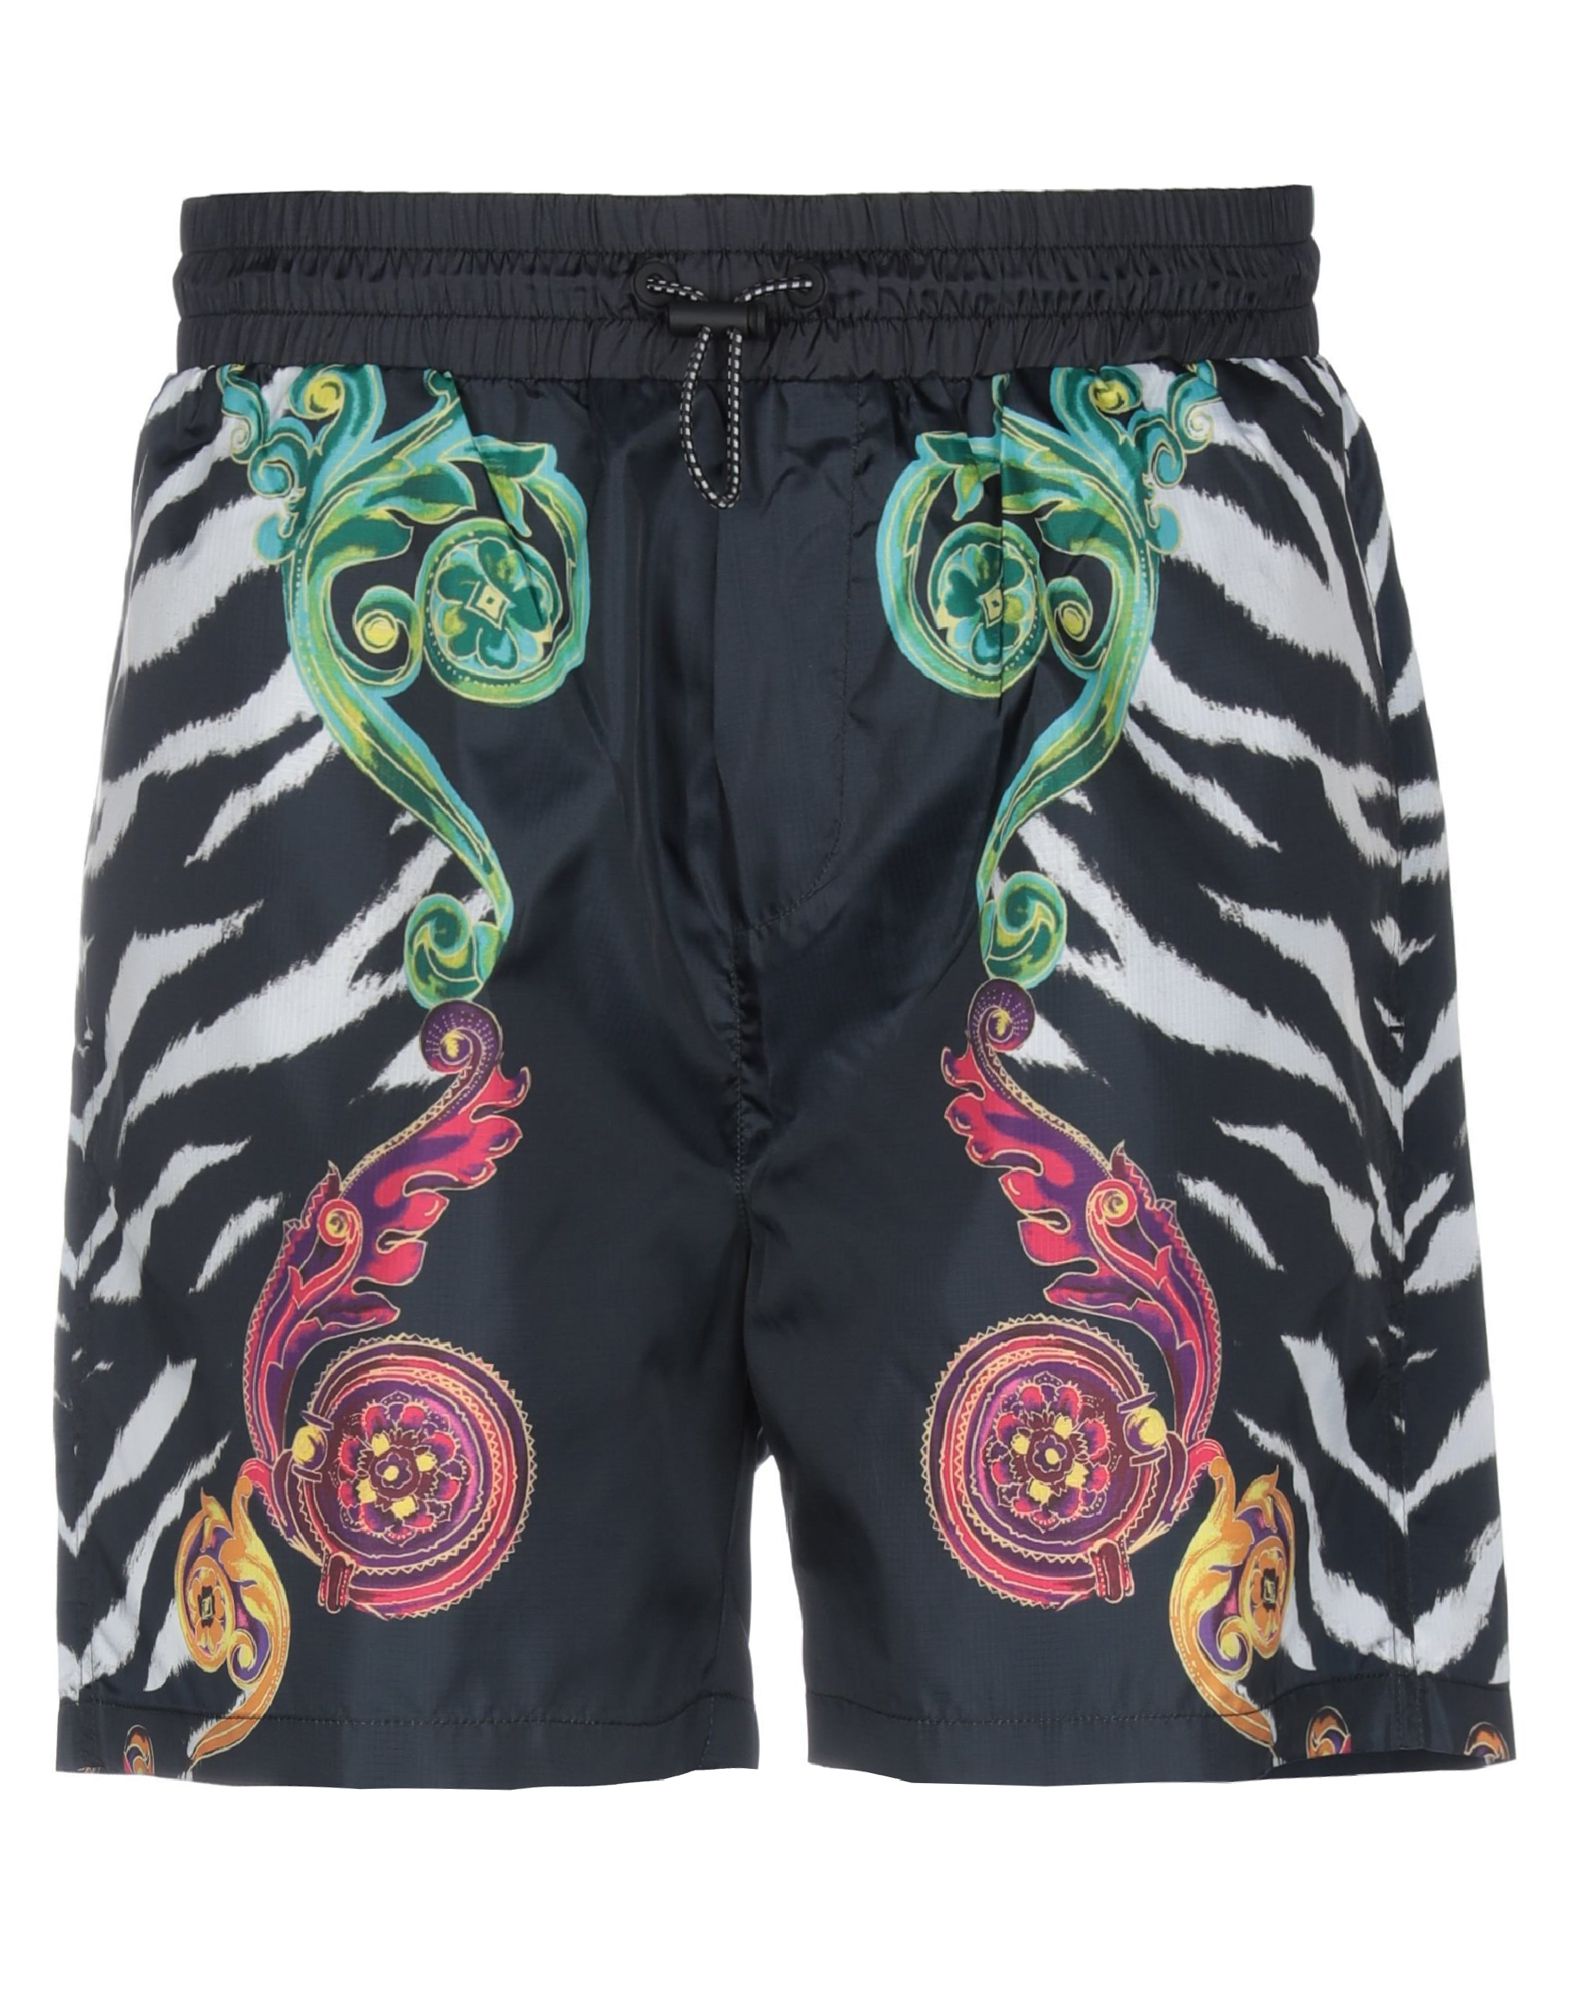 VERSACE JEANS COUTURE Shorts & Bermudashorts Herren Schwarz von VERSACE JEANS COUTURE